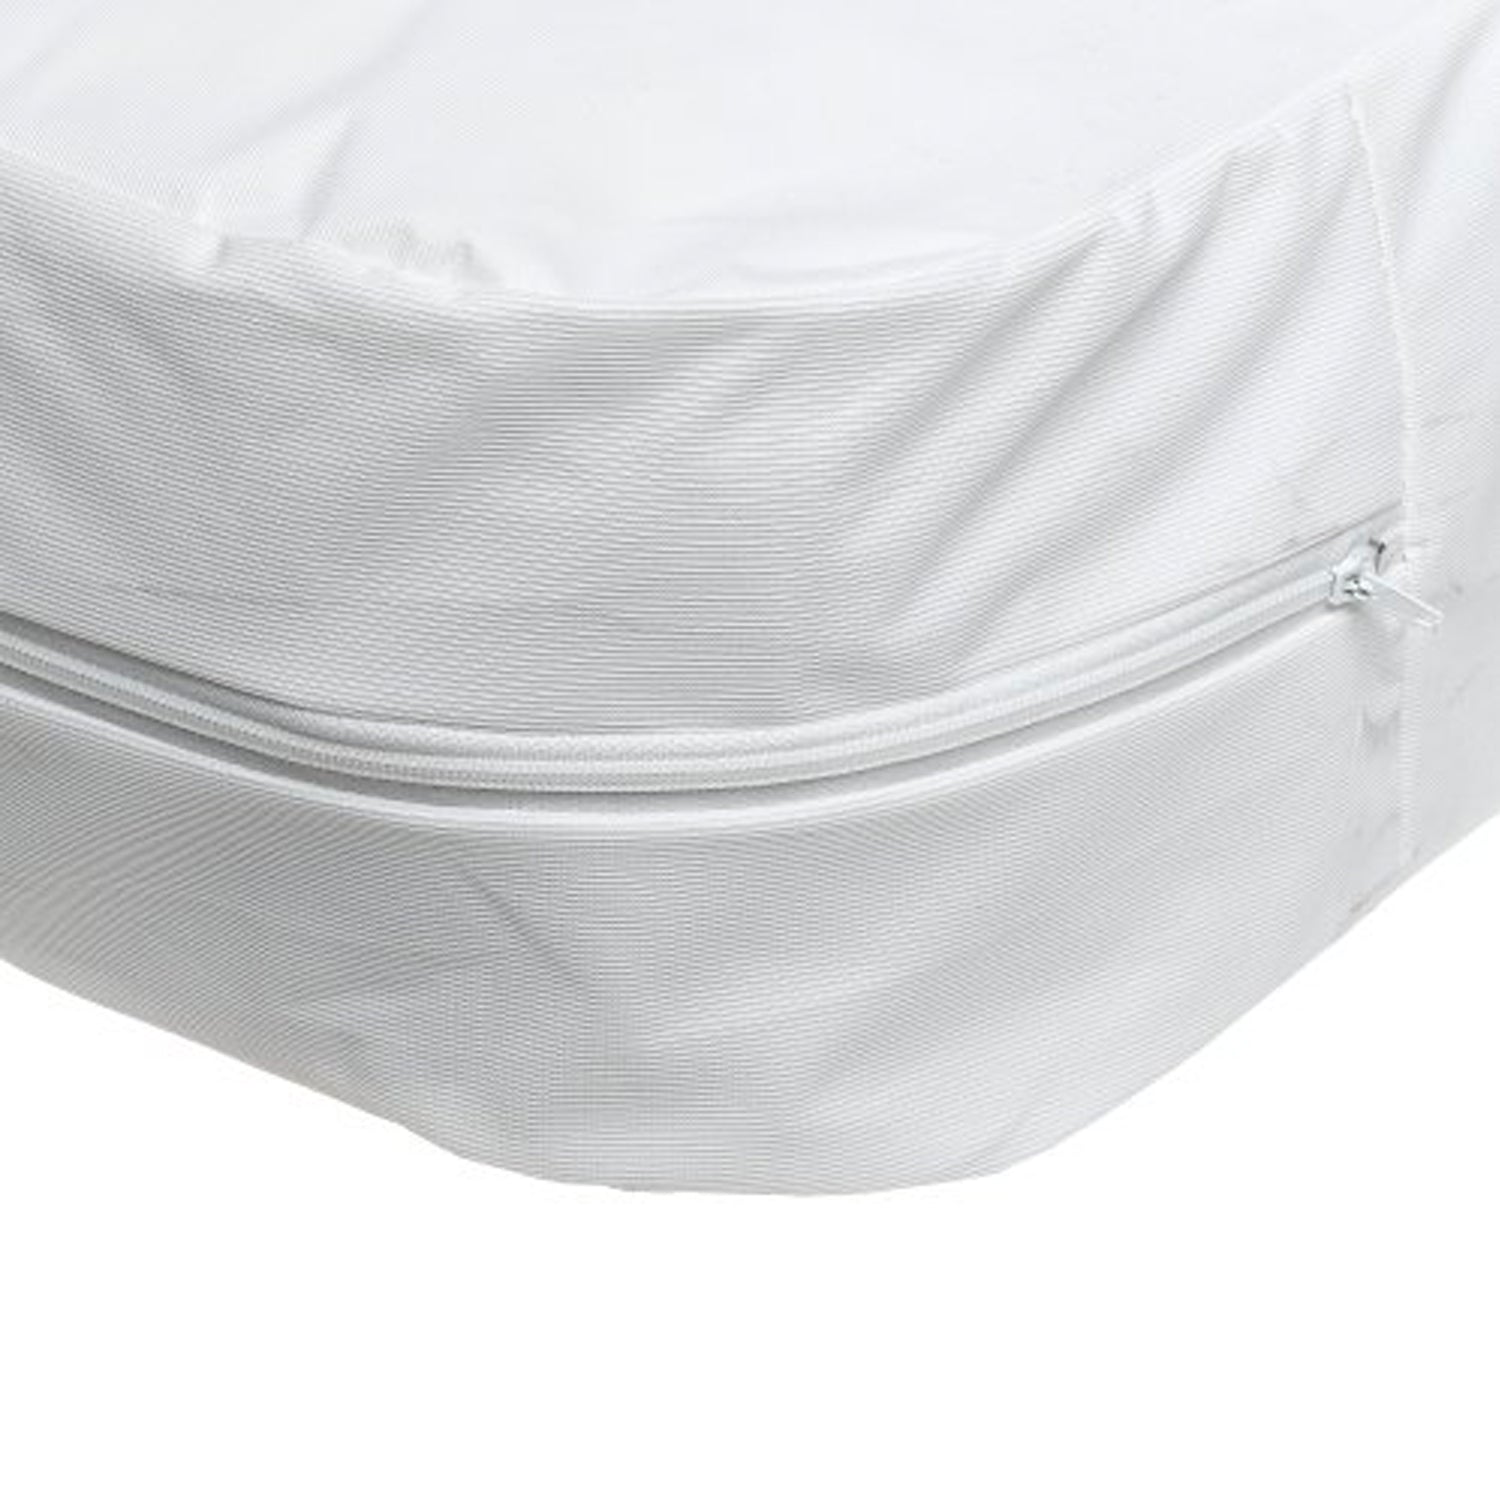 DMI Protective Mattress Cover for Beds AM-554-8068-1953